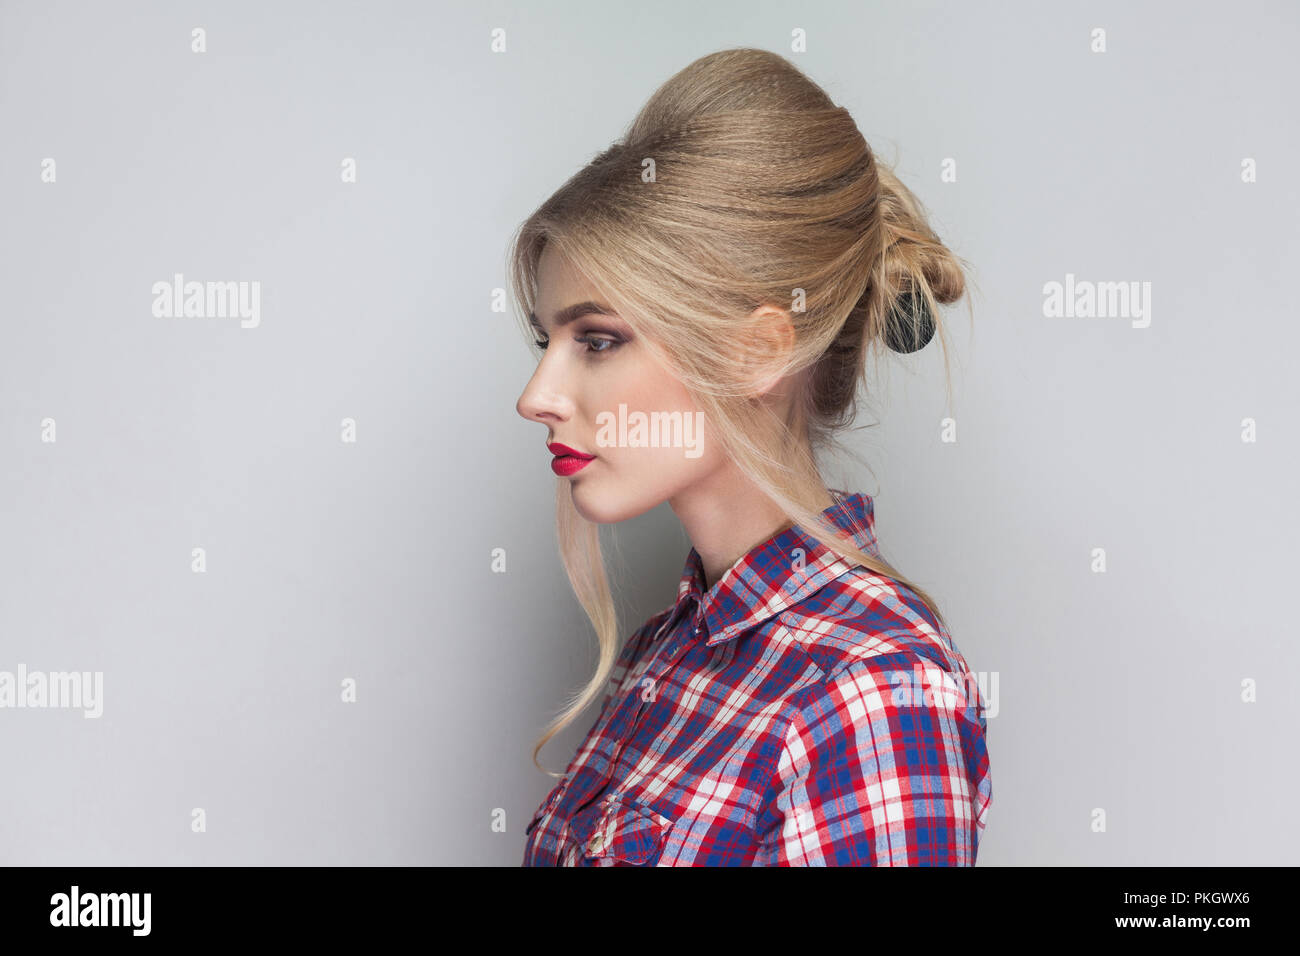 Profile side view of beautiful girl with pink checkered shirt, collected updo hairstyle, red lips and makeup standing with seious face and looking awa Stock Photo